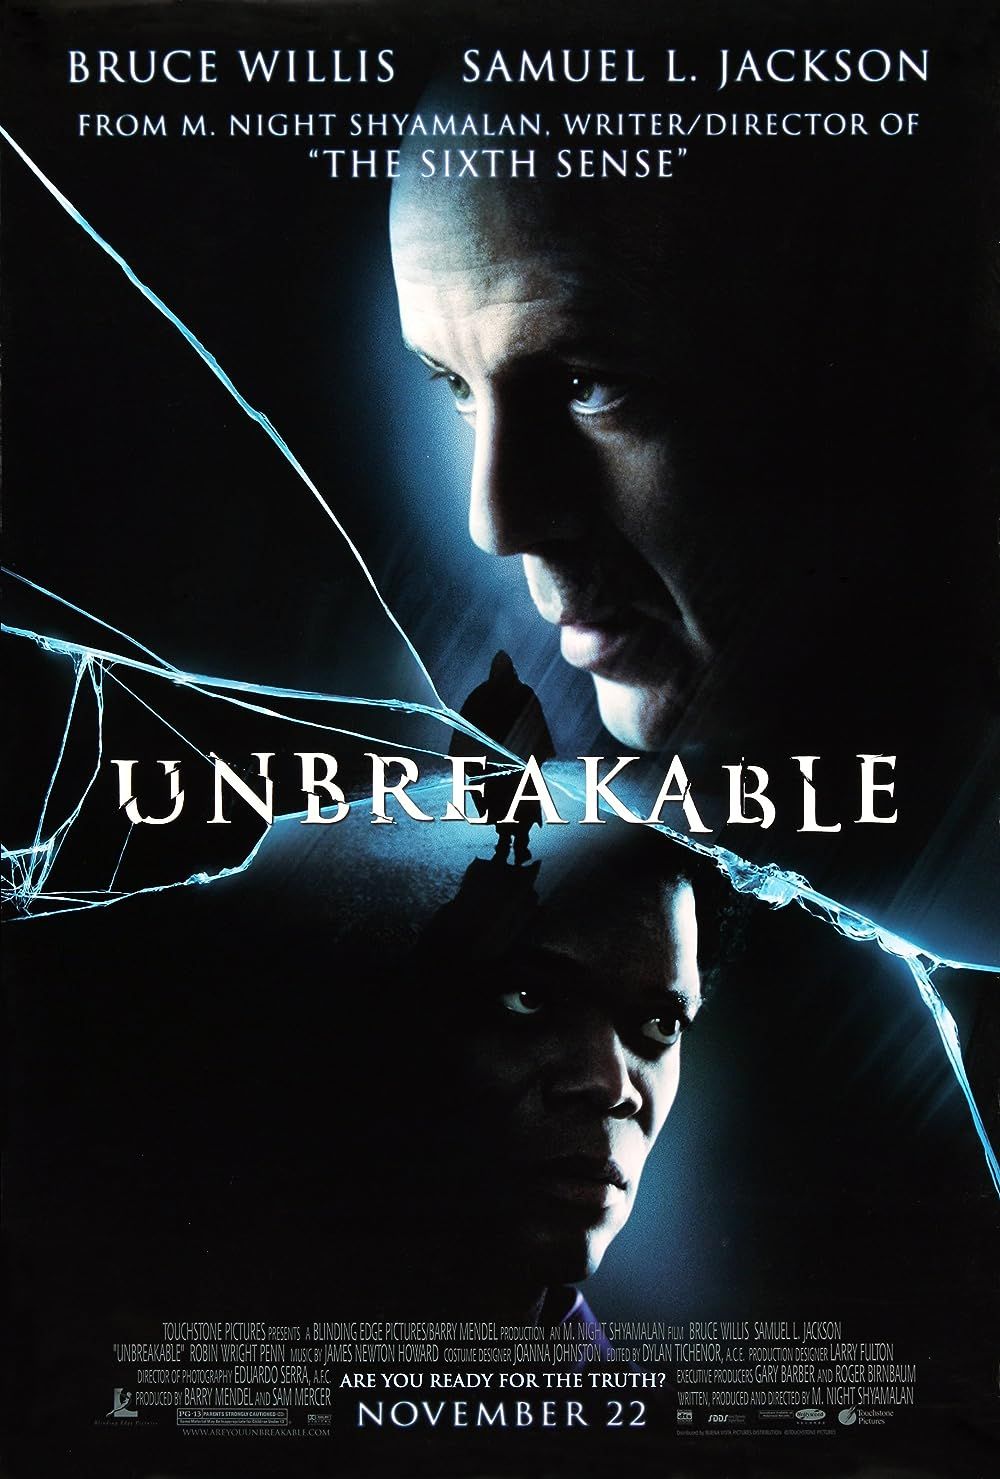 Bruce Willis and Samuel L. Jackson on the poster for Unbreakable